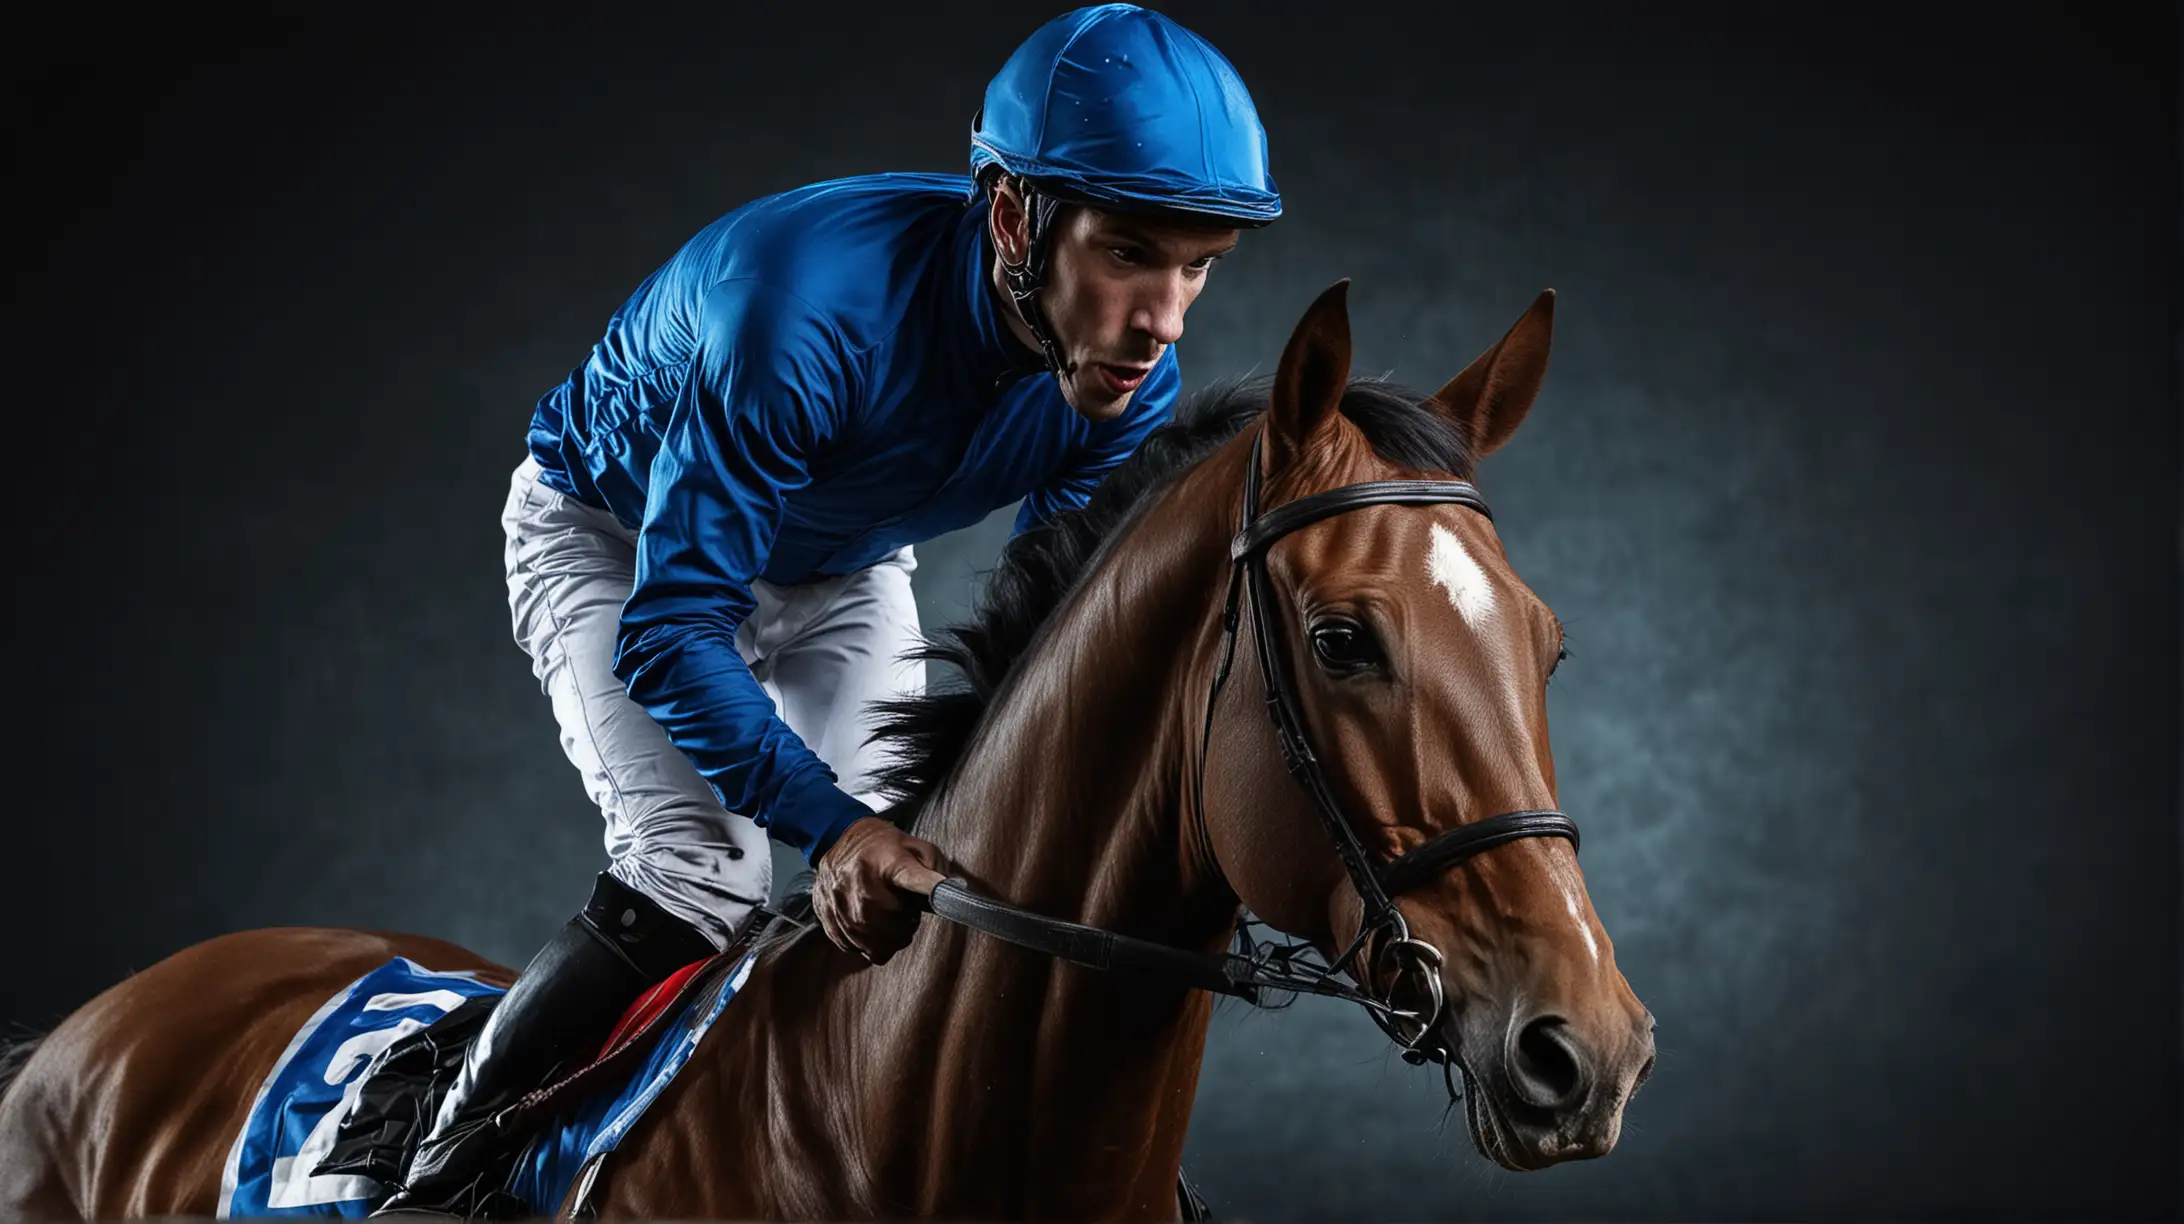 Racehorse with jockey at races, blue jersey, dark background